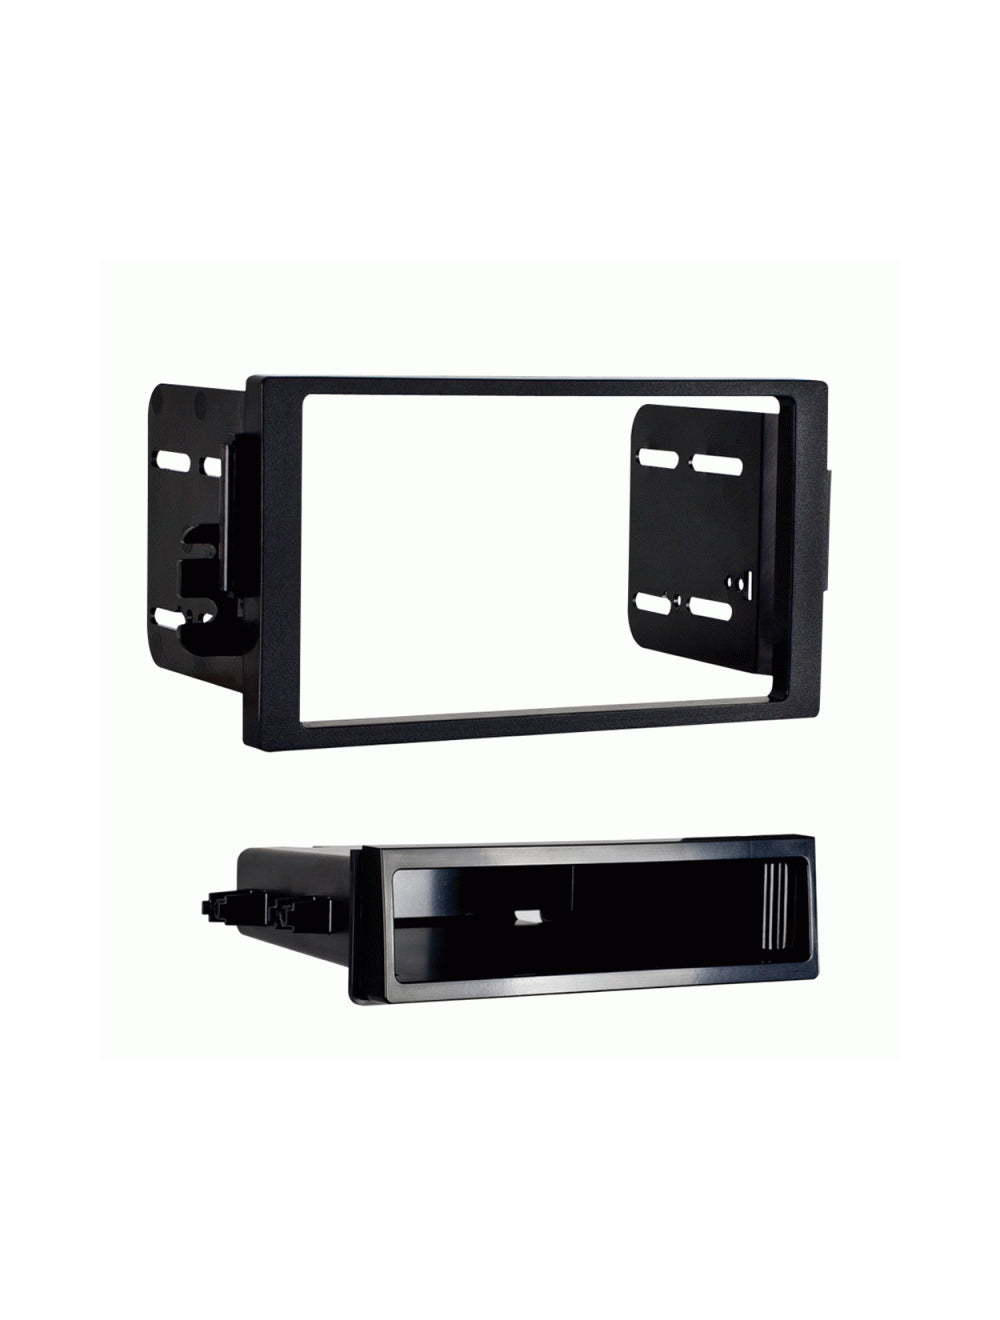 Metra 99-3108 Double/Single DIN Radio Installation Kit For Select 2000-2005 Saturn Vehicles